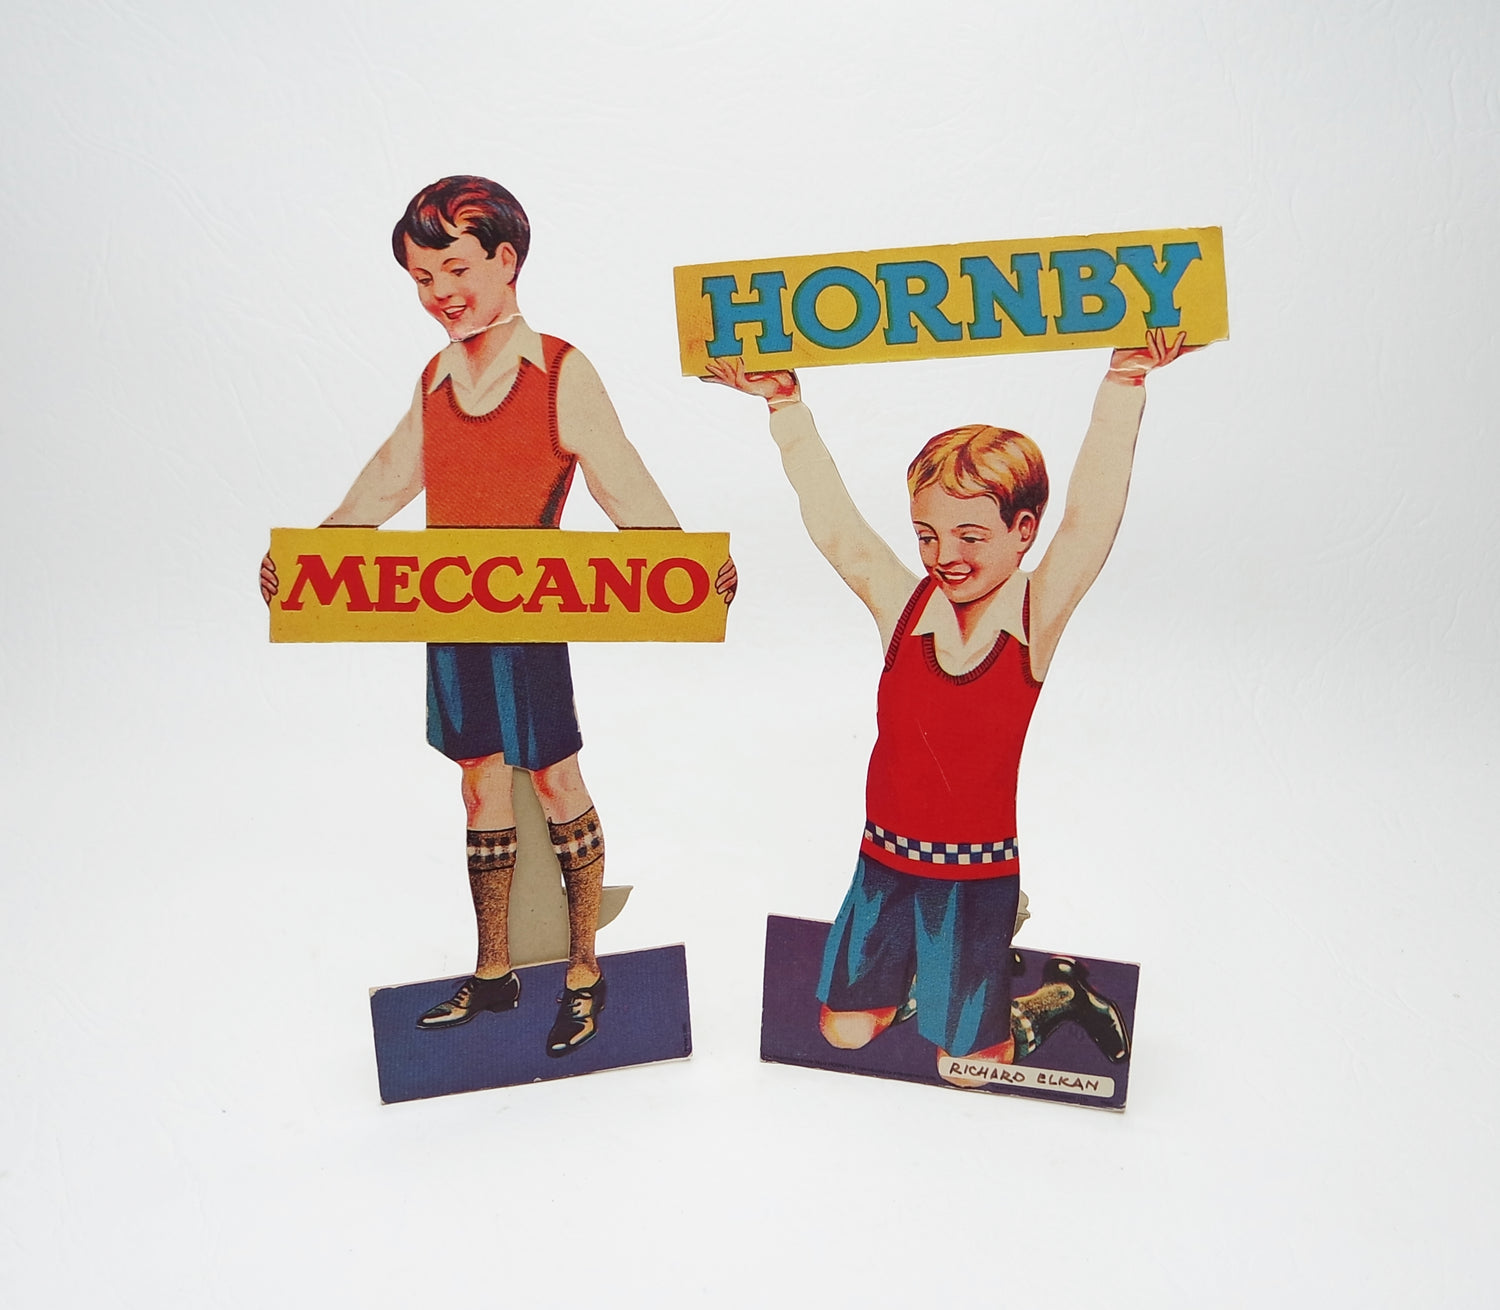 Child Meccano & Hornby Shop Display Advertisements